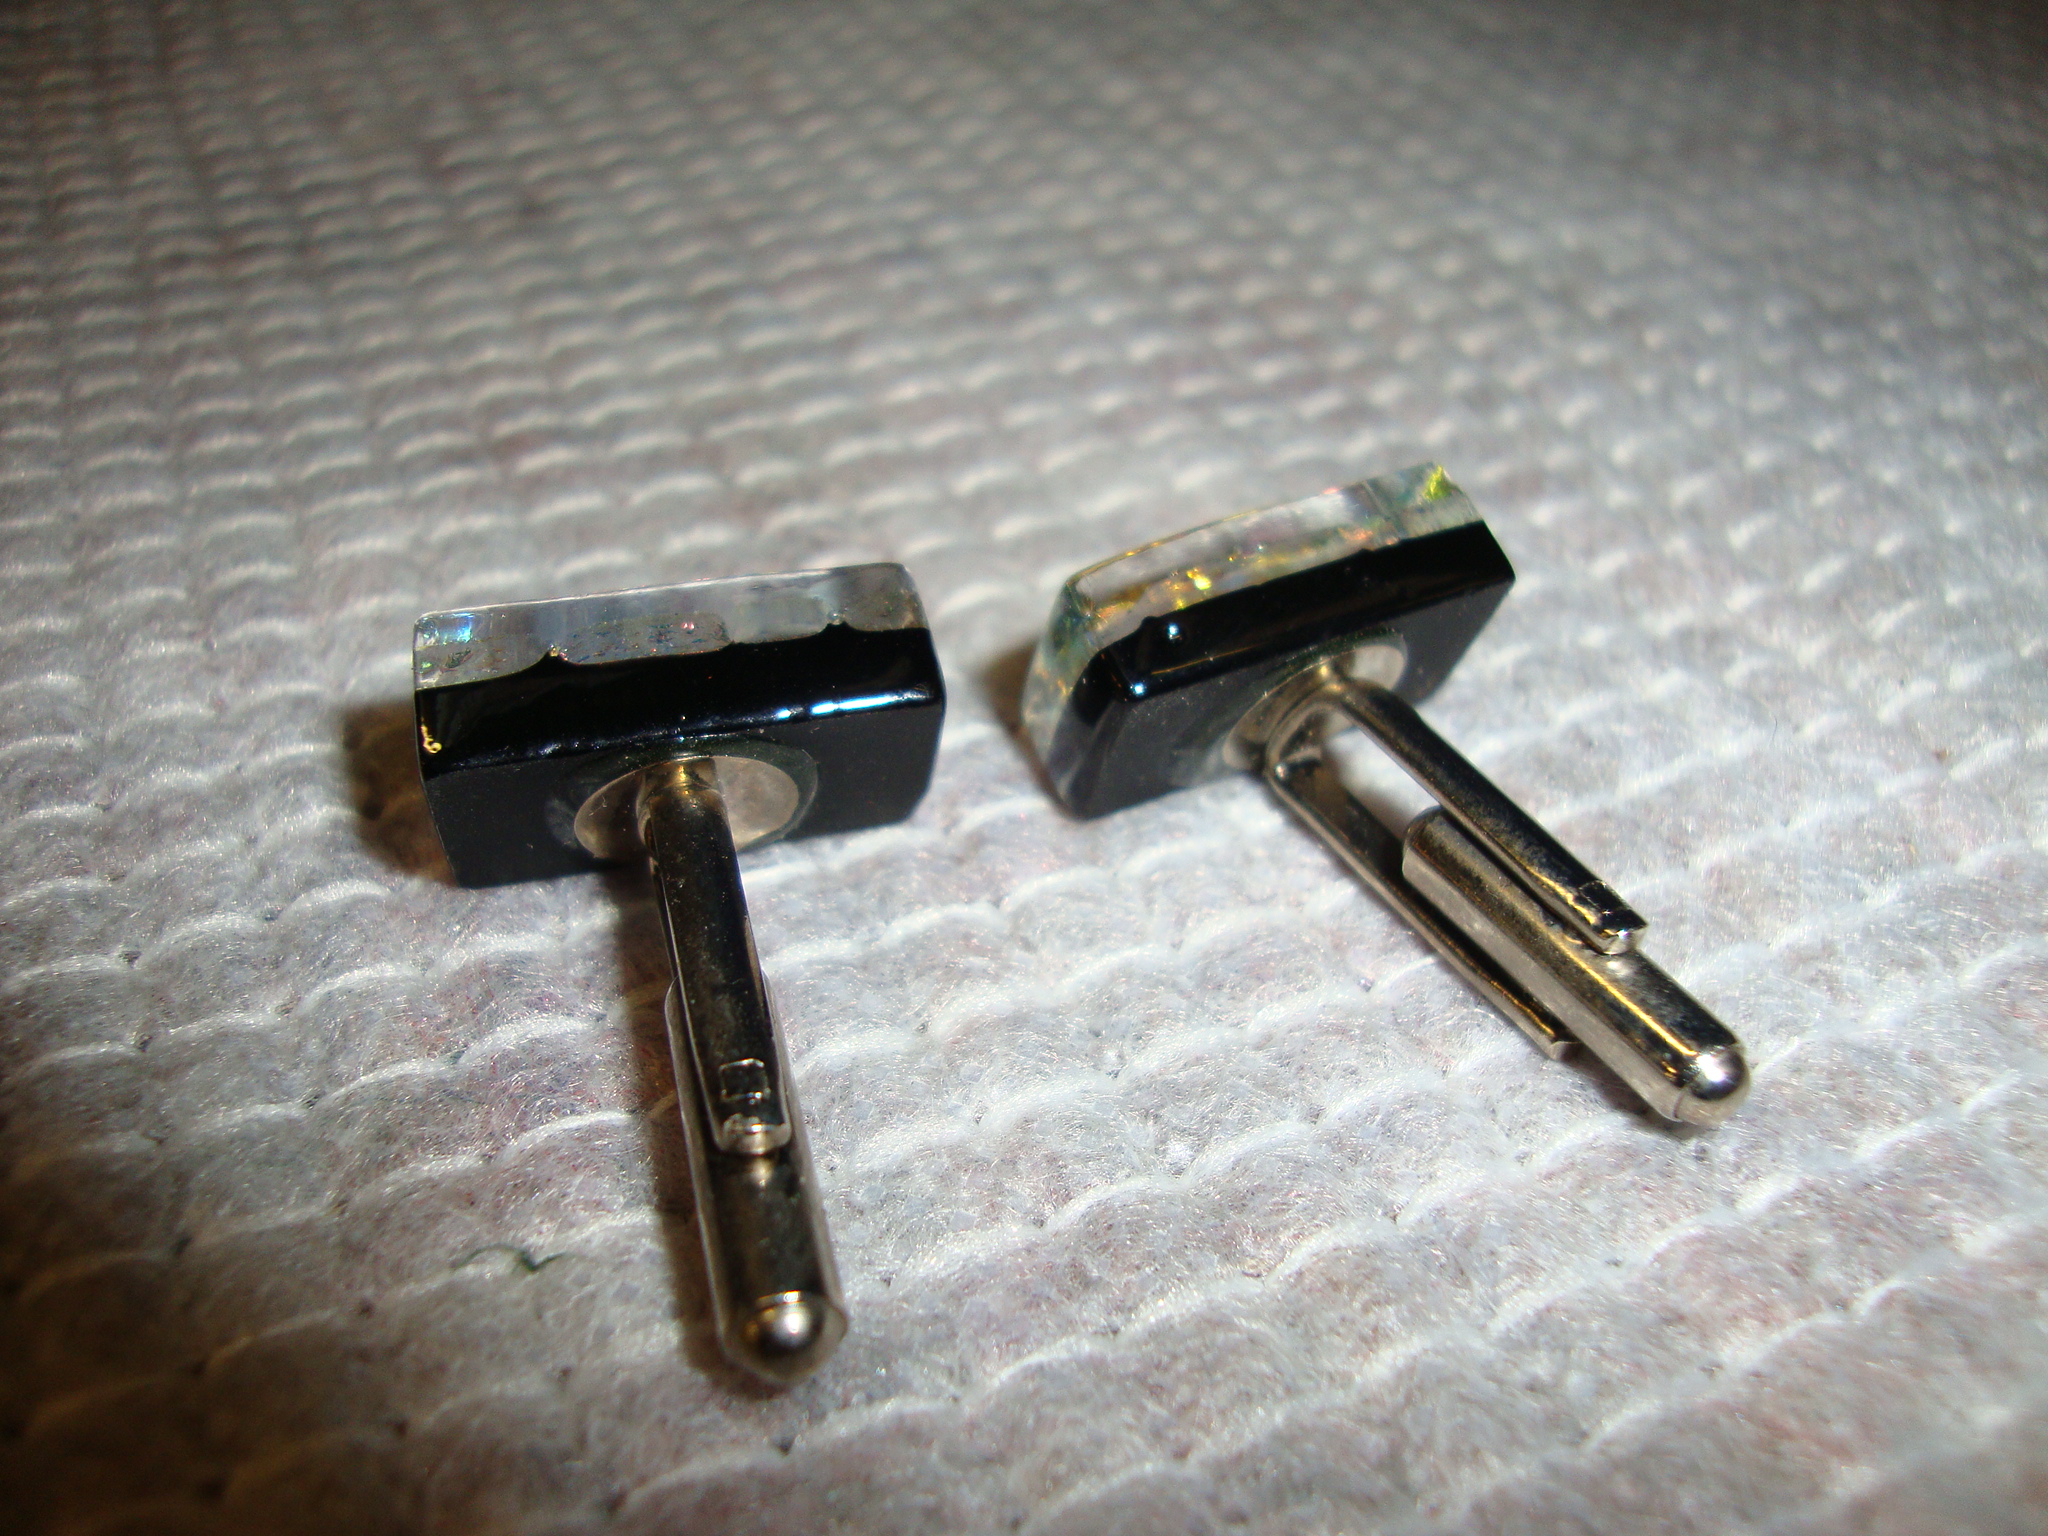 Pair of cufflinks understood to be handmade in glass - Image 4 of 4